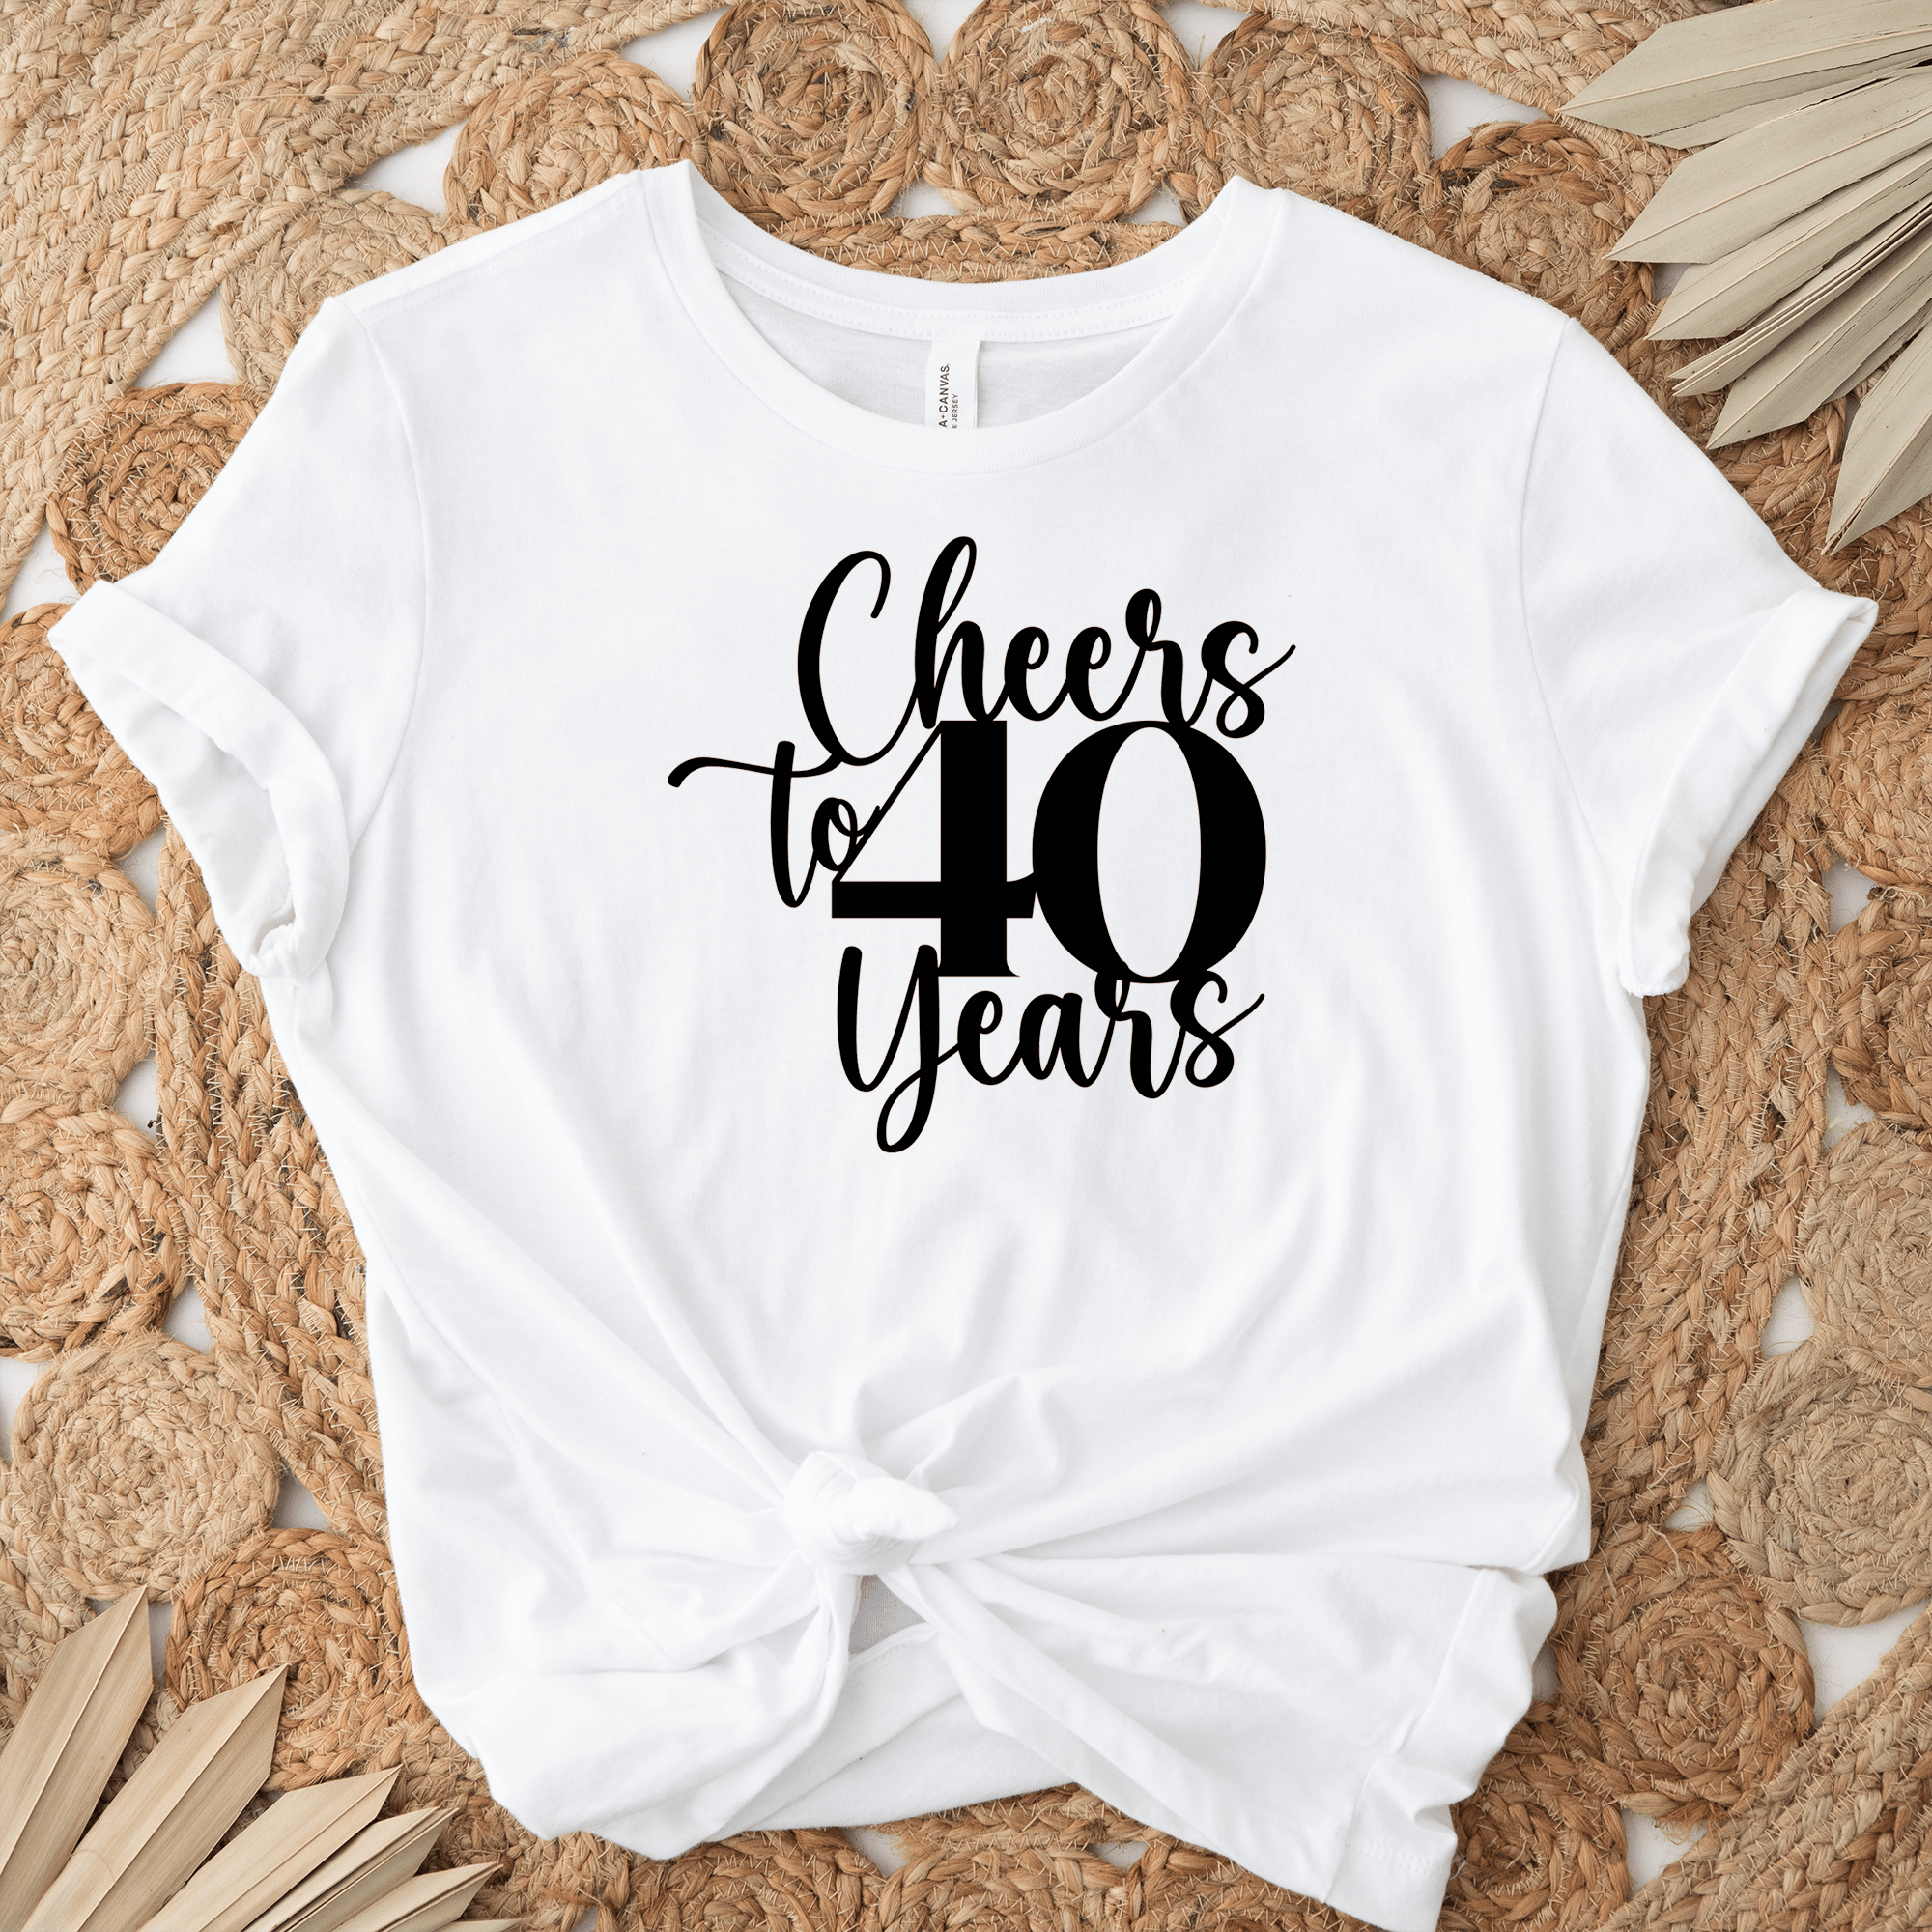 Womens White T Shirt with Cheers-To-Fourty-Years design